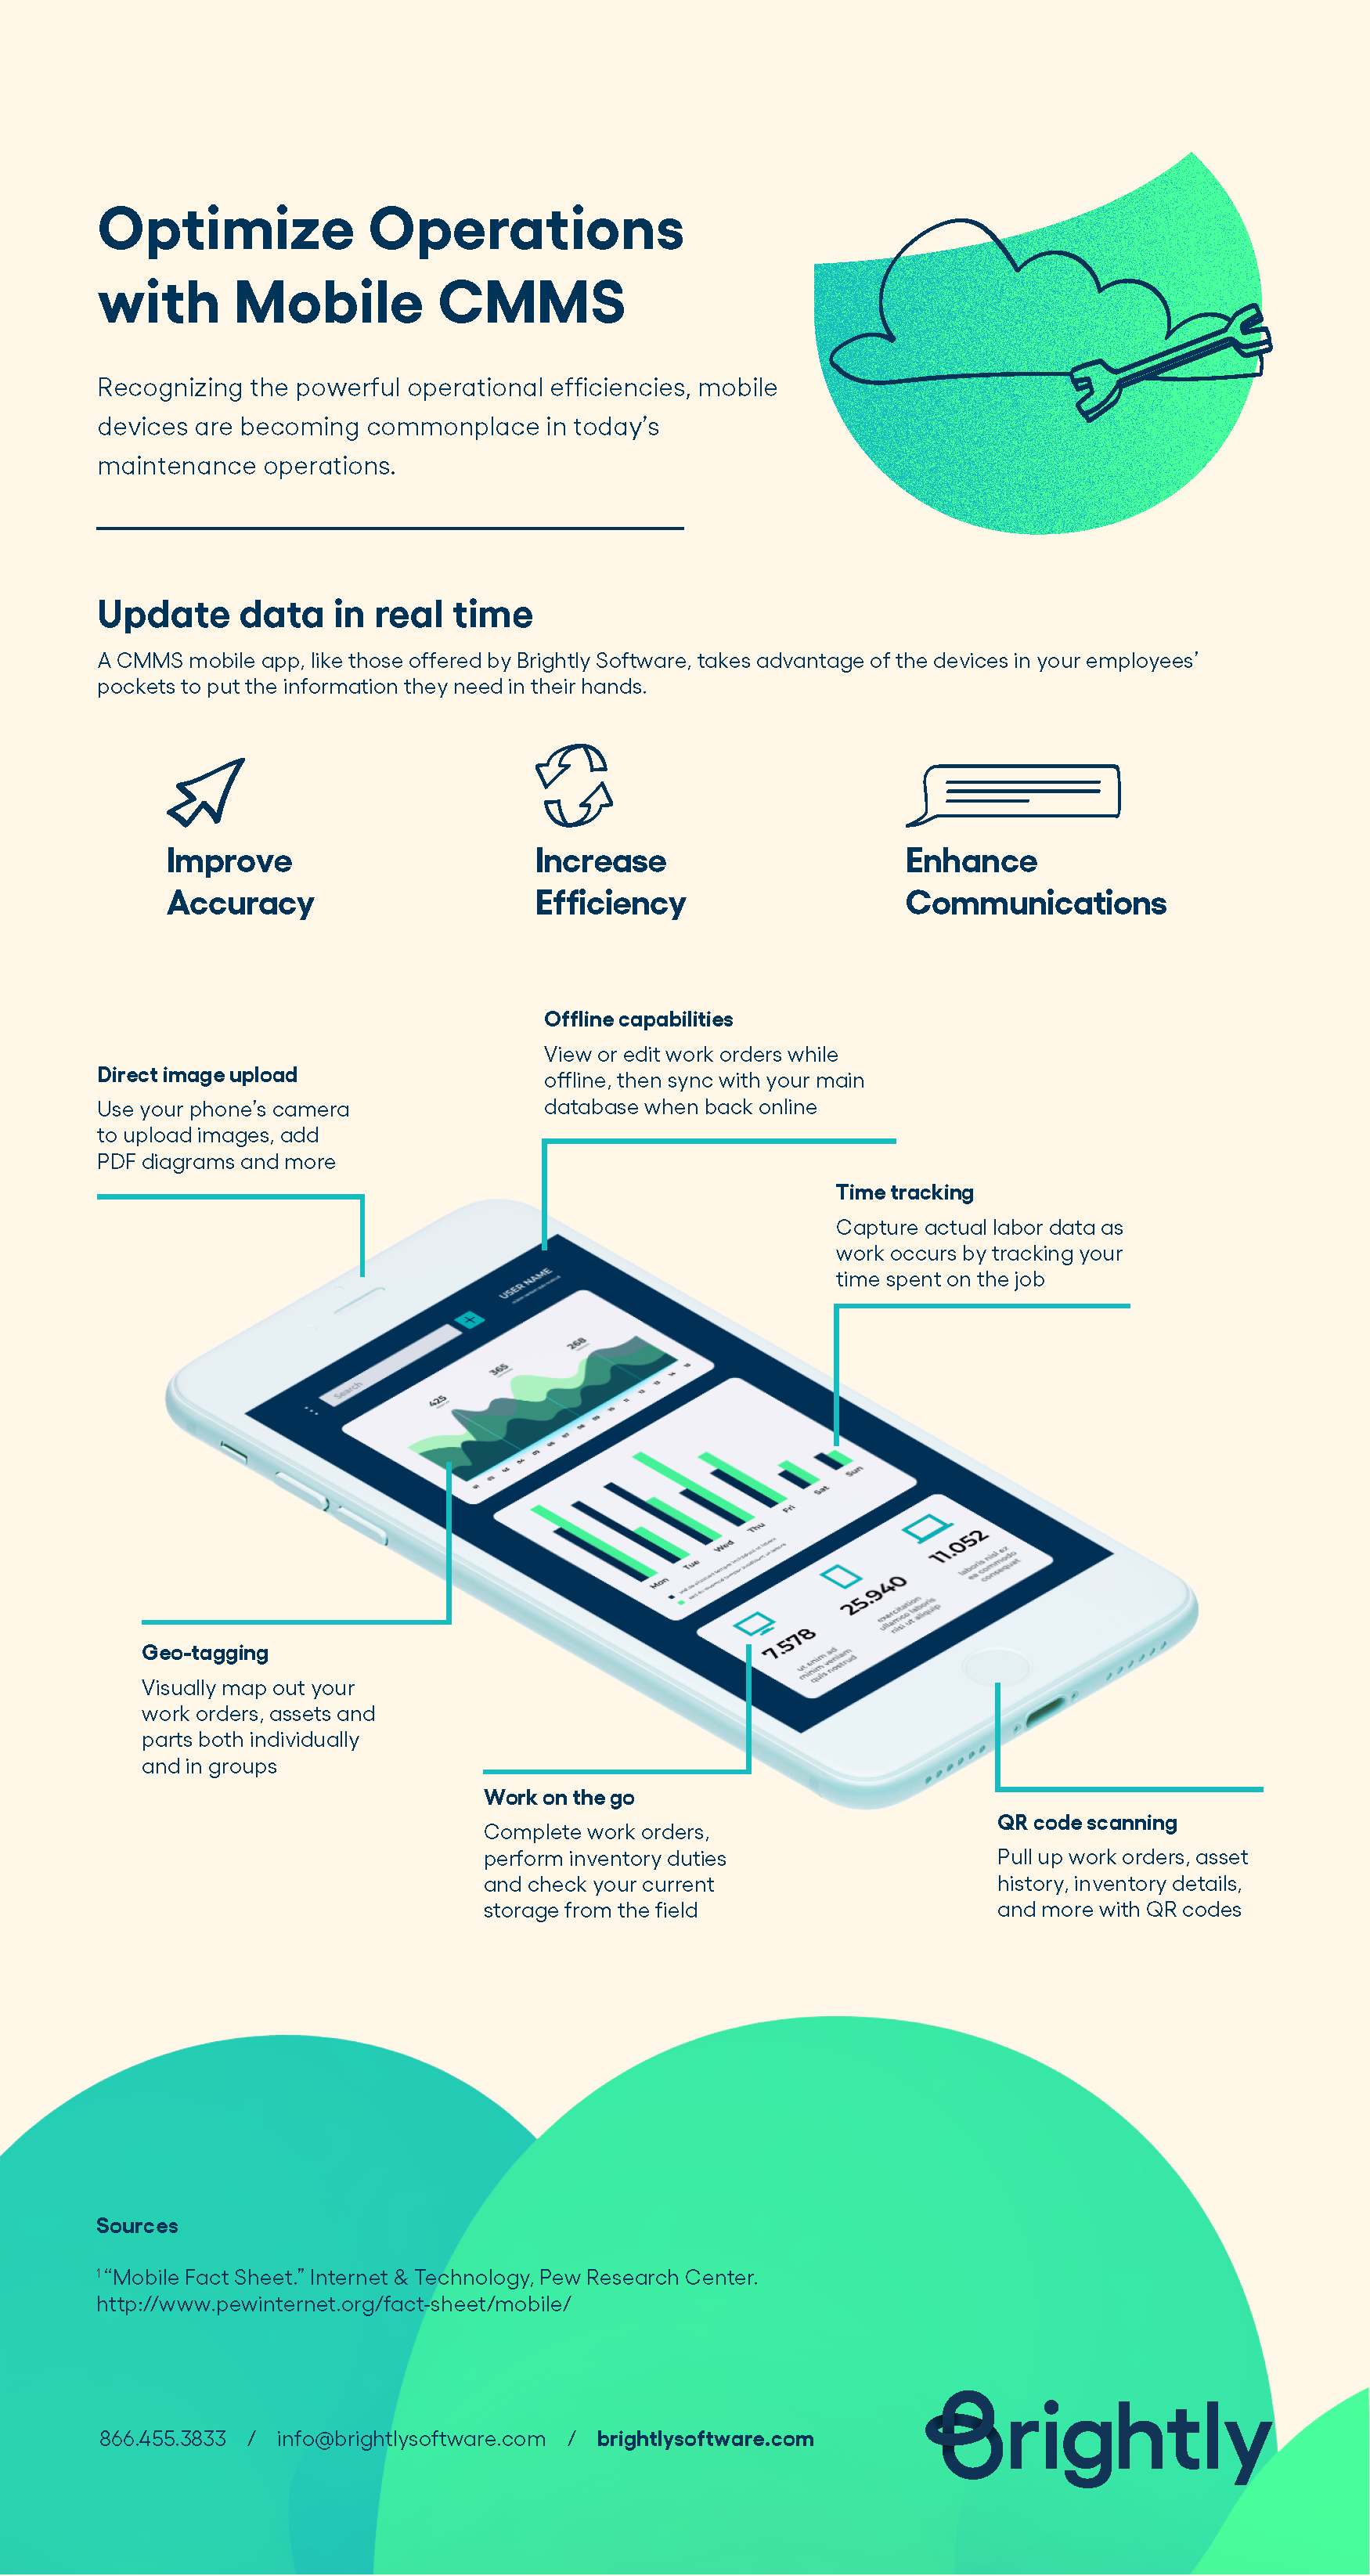 Brightly - Infographic - Optimize Mobile CMMS